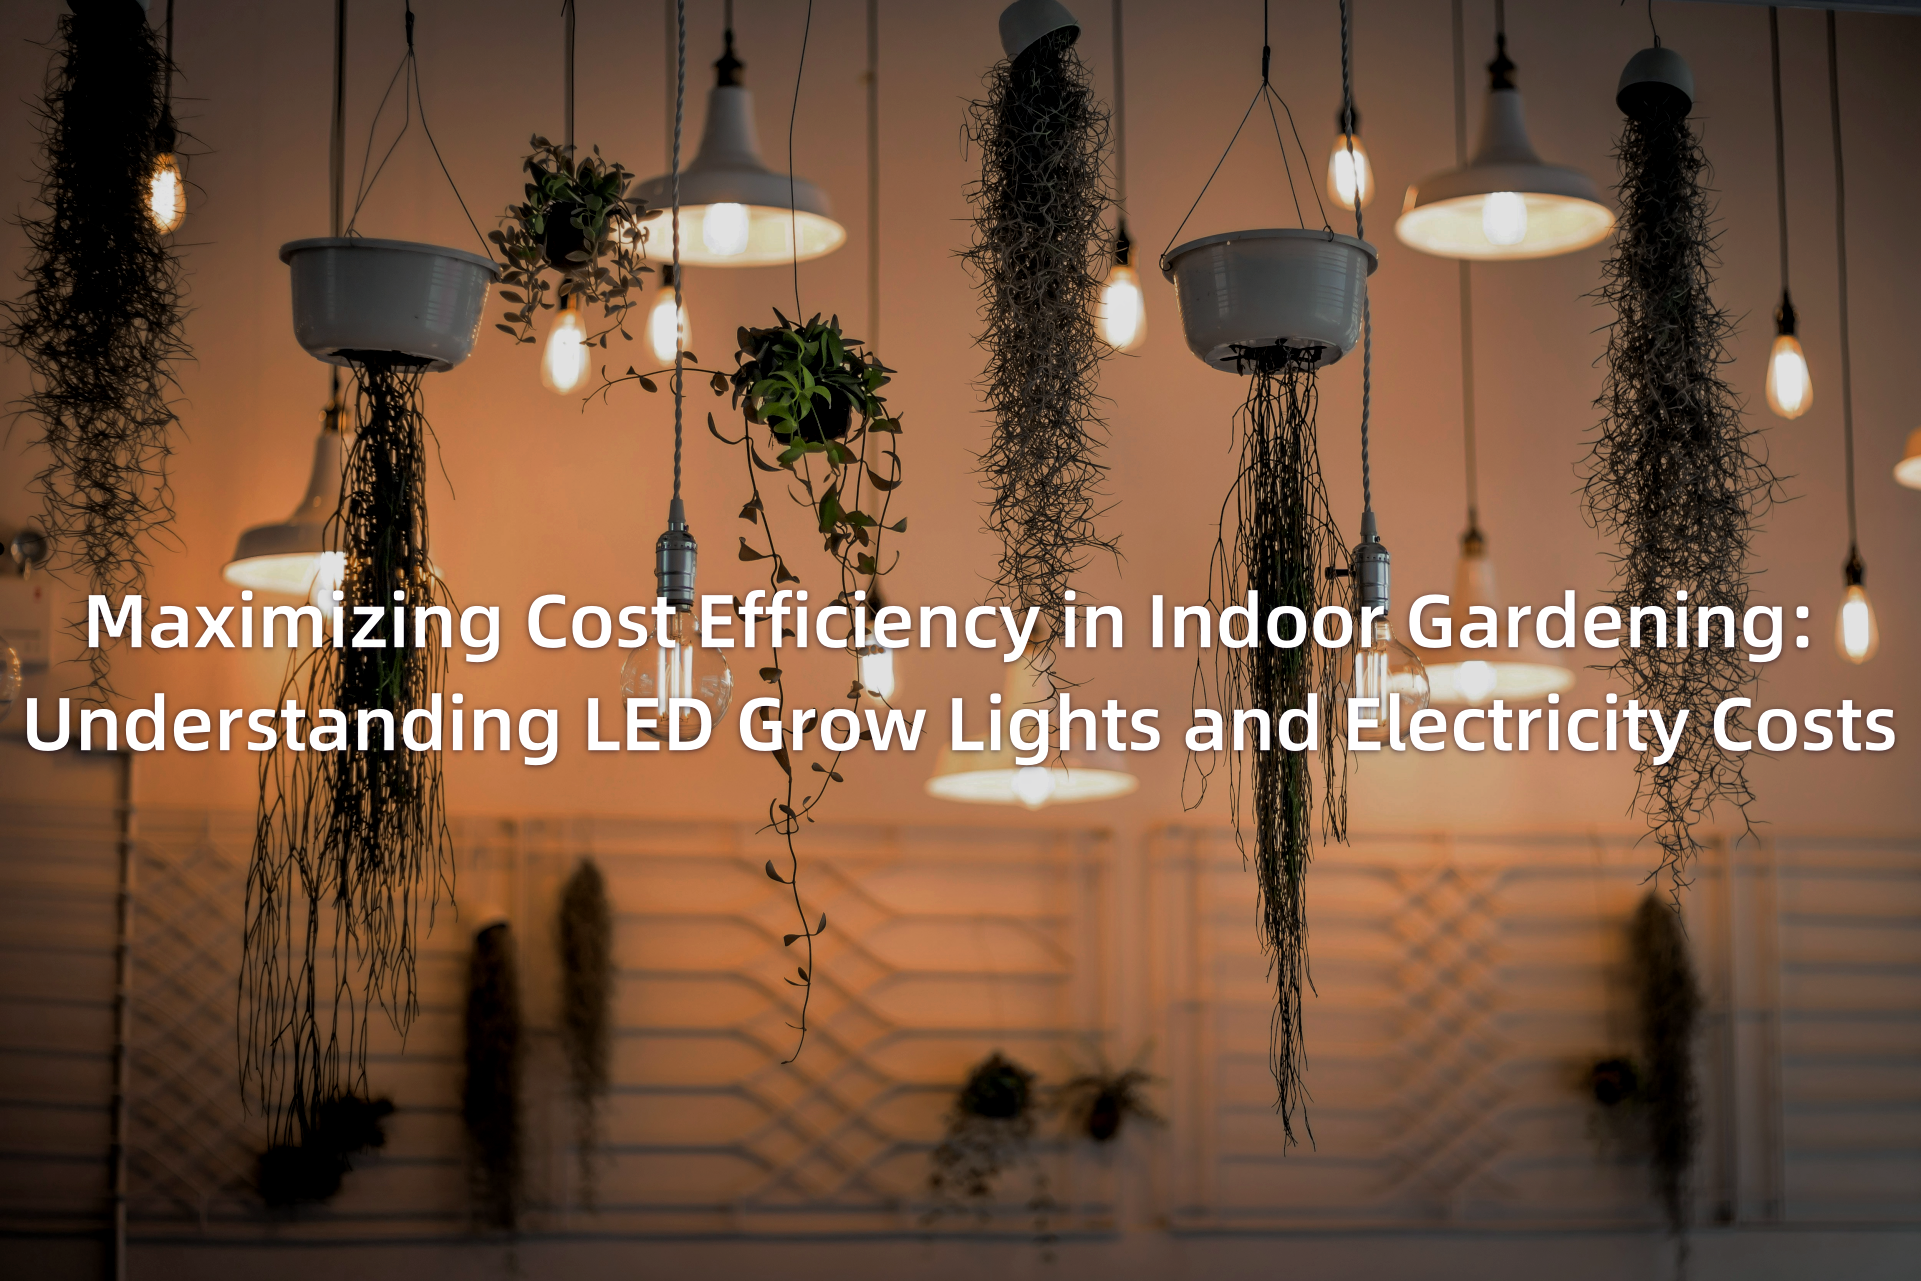 Maximizing Cost Efficiency in Indoor Gardening: Understanding LED Grow Lights and Electricity Costs